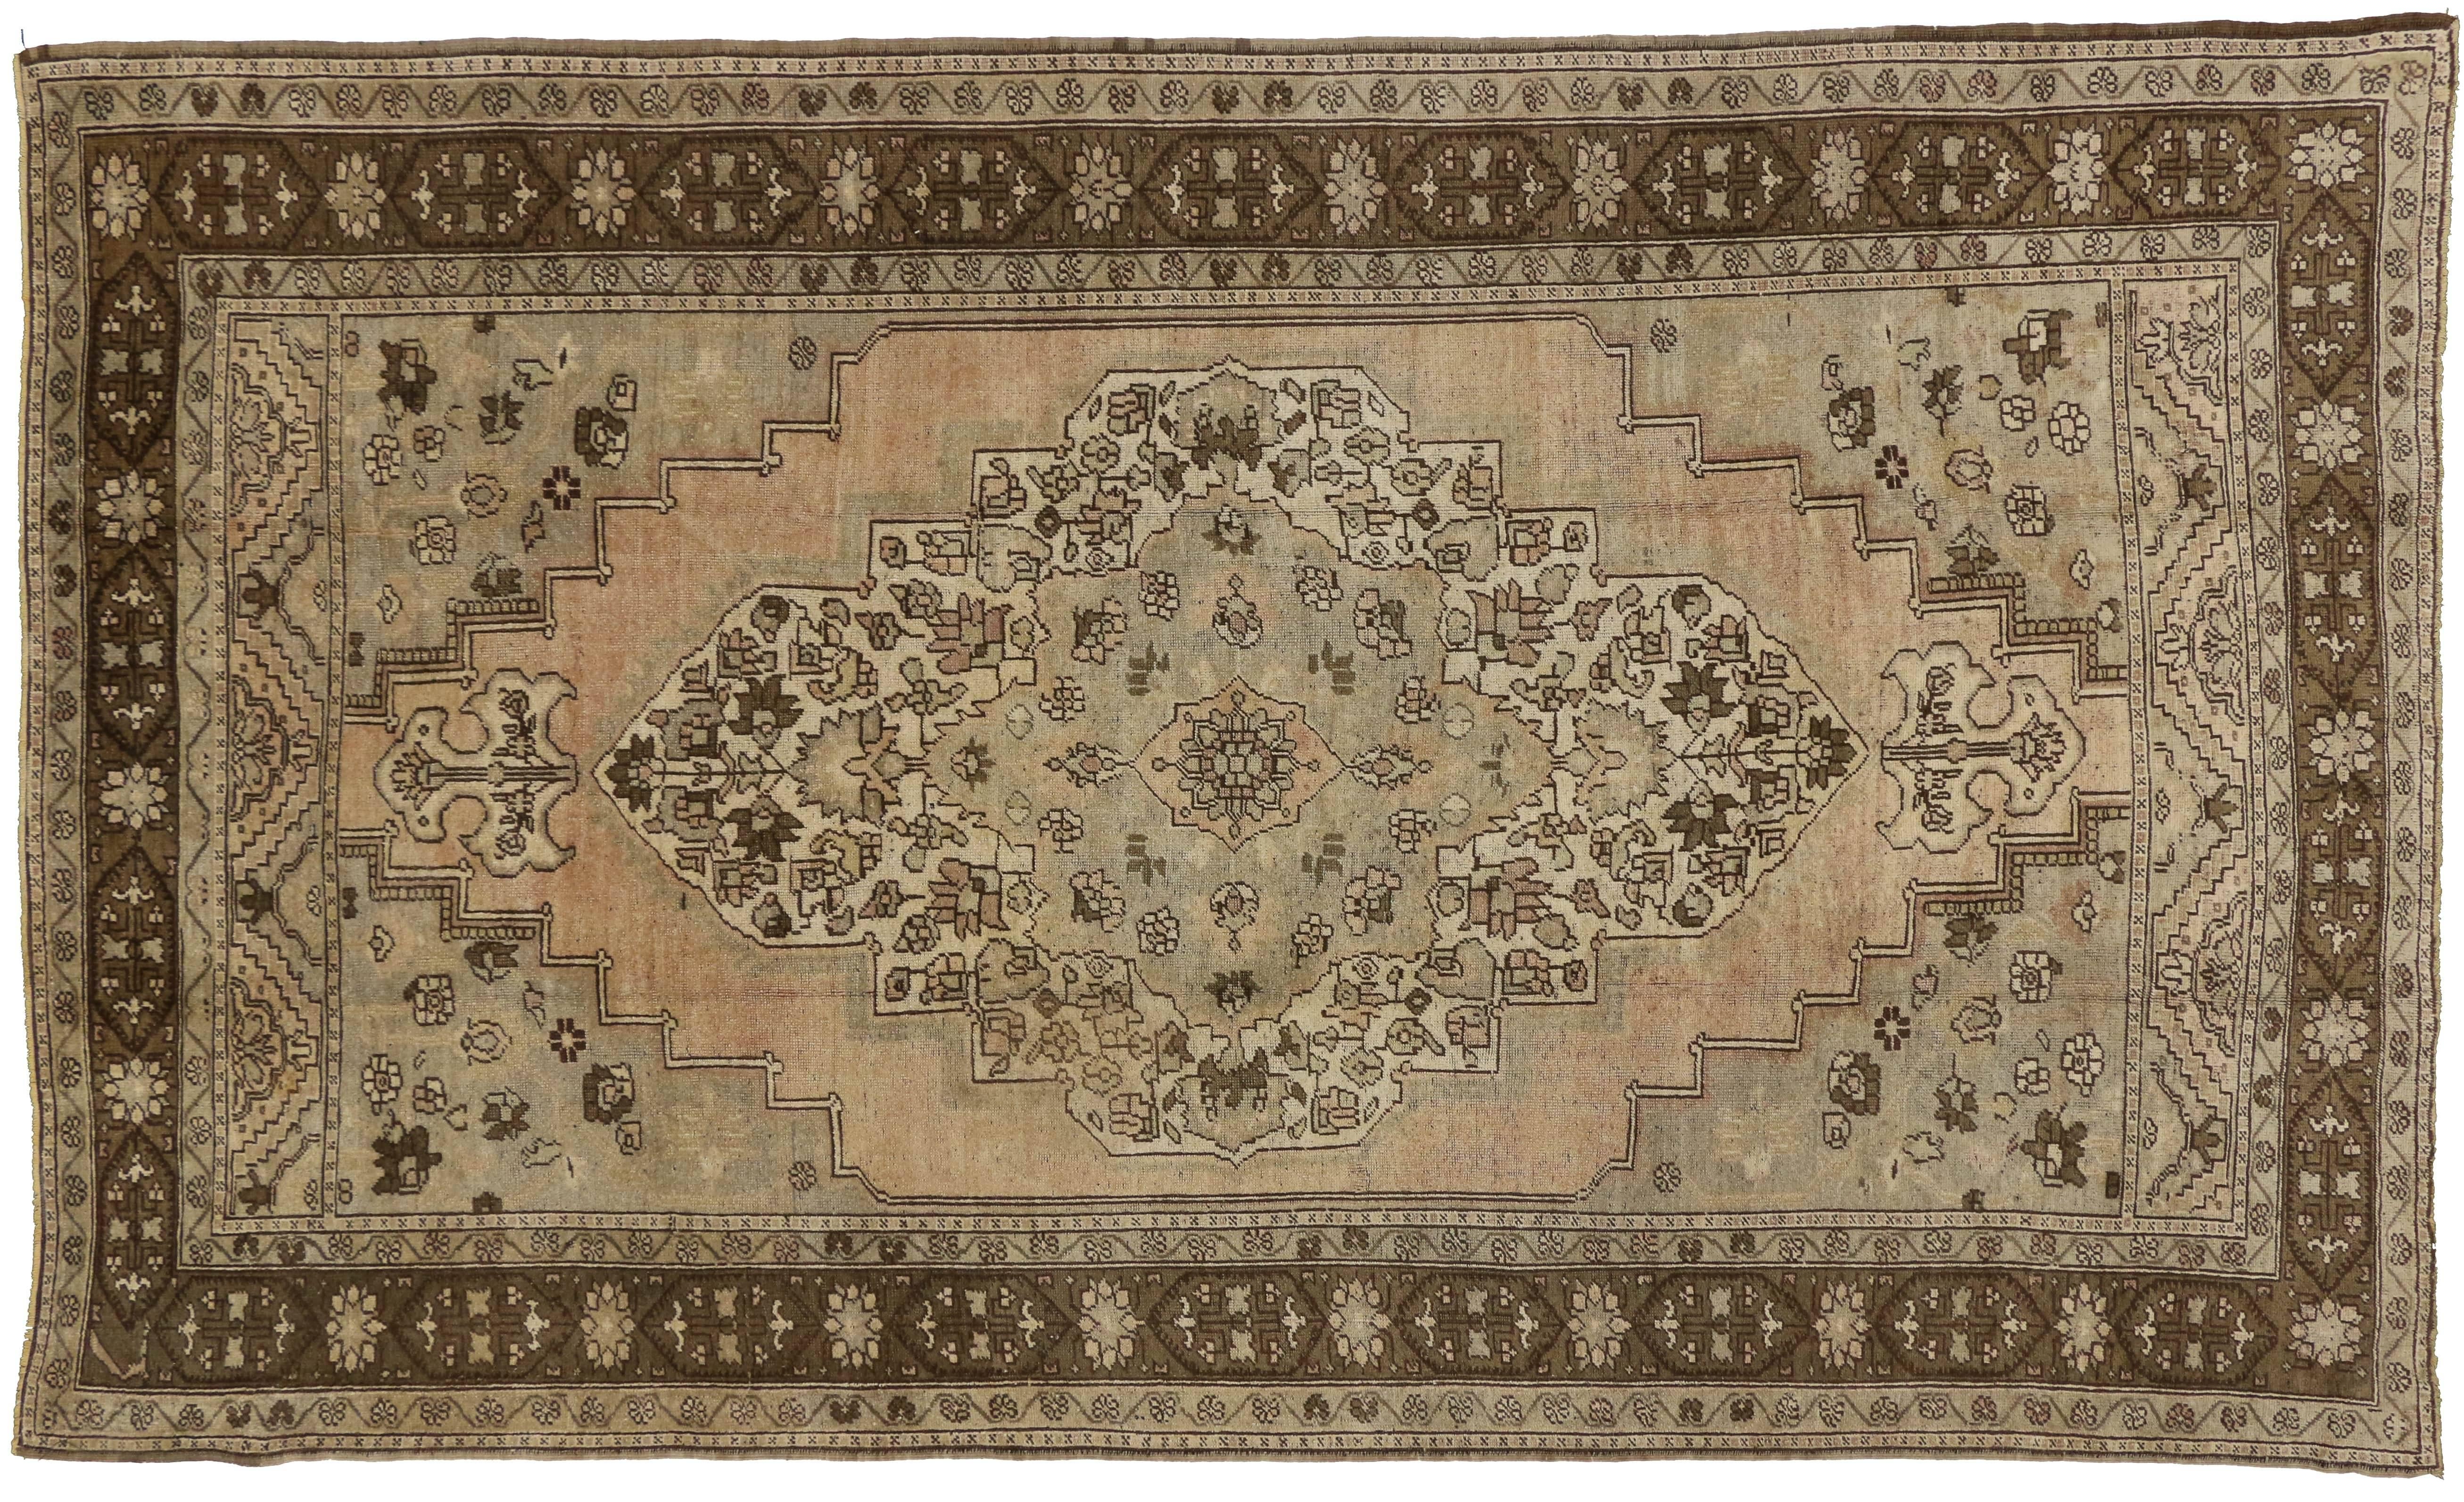 73945, Vintage Turkish Oushak Rug with Warm, Neutral Colors, 06'10 X 11'07. A large anchor medallion patterned with geometric stylized flowers floats on an abrashed field. Spandrels are dotted with stylized flowers and tiny buds. The vintage Turkish